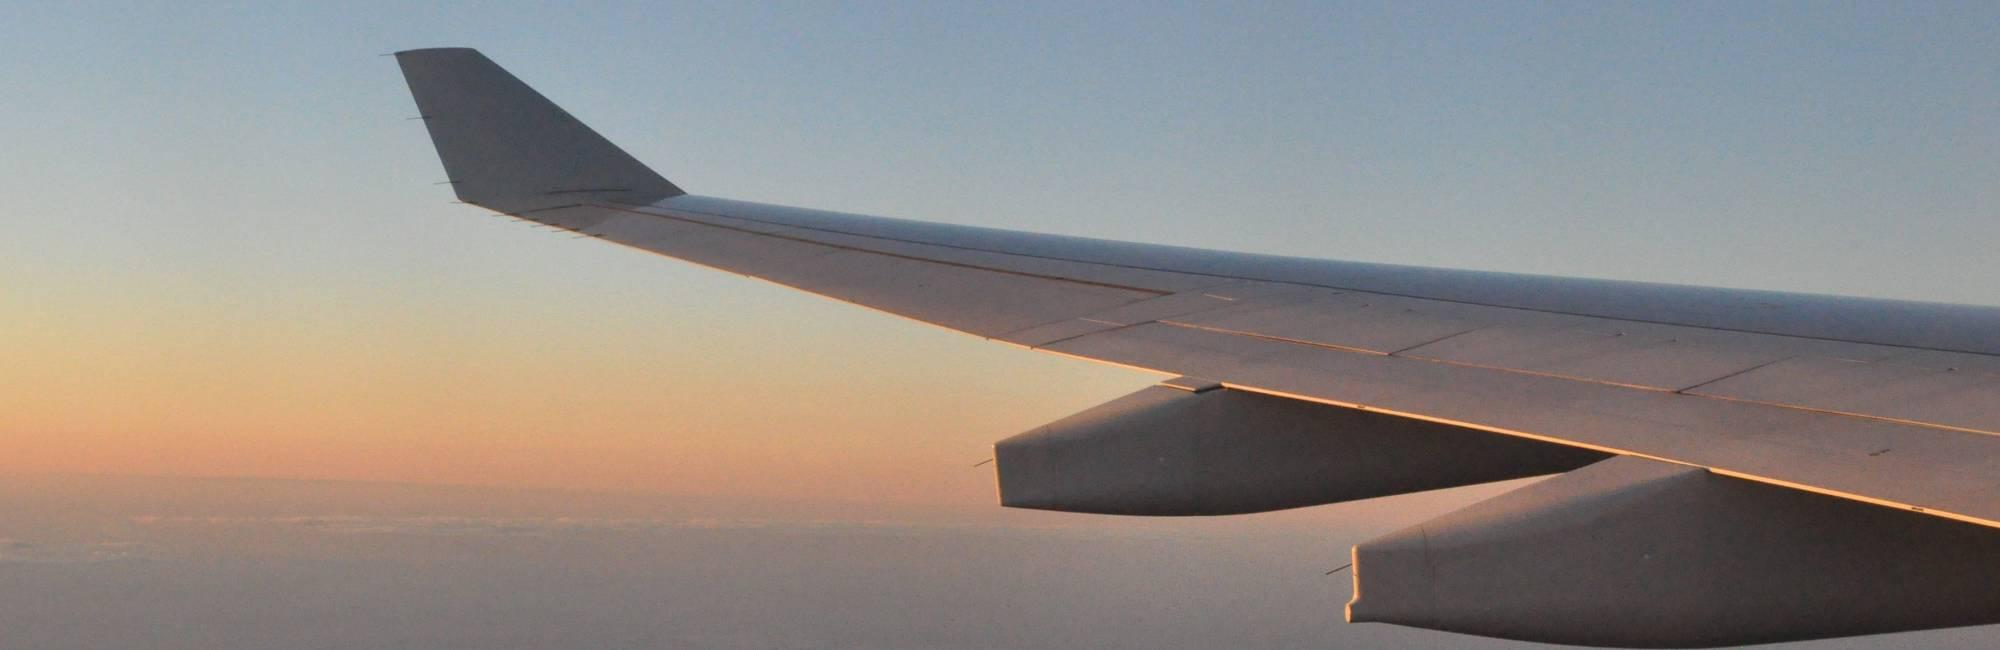 wing of airplane in flight 